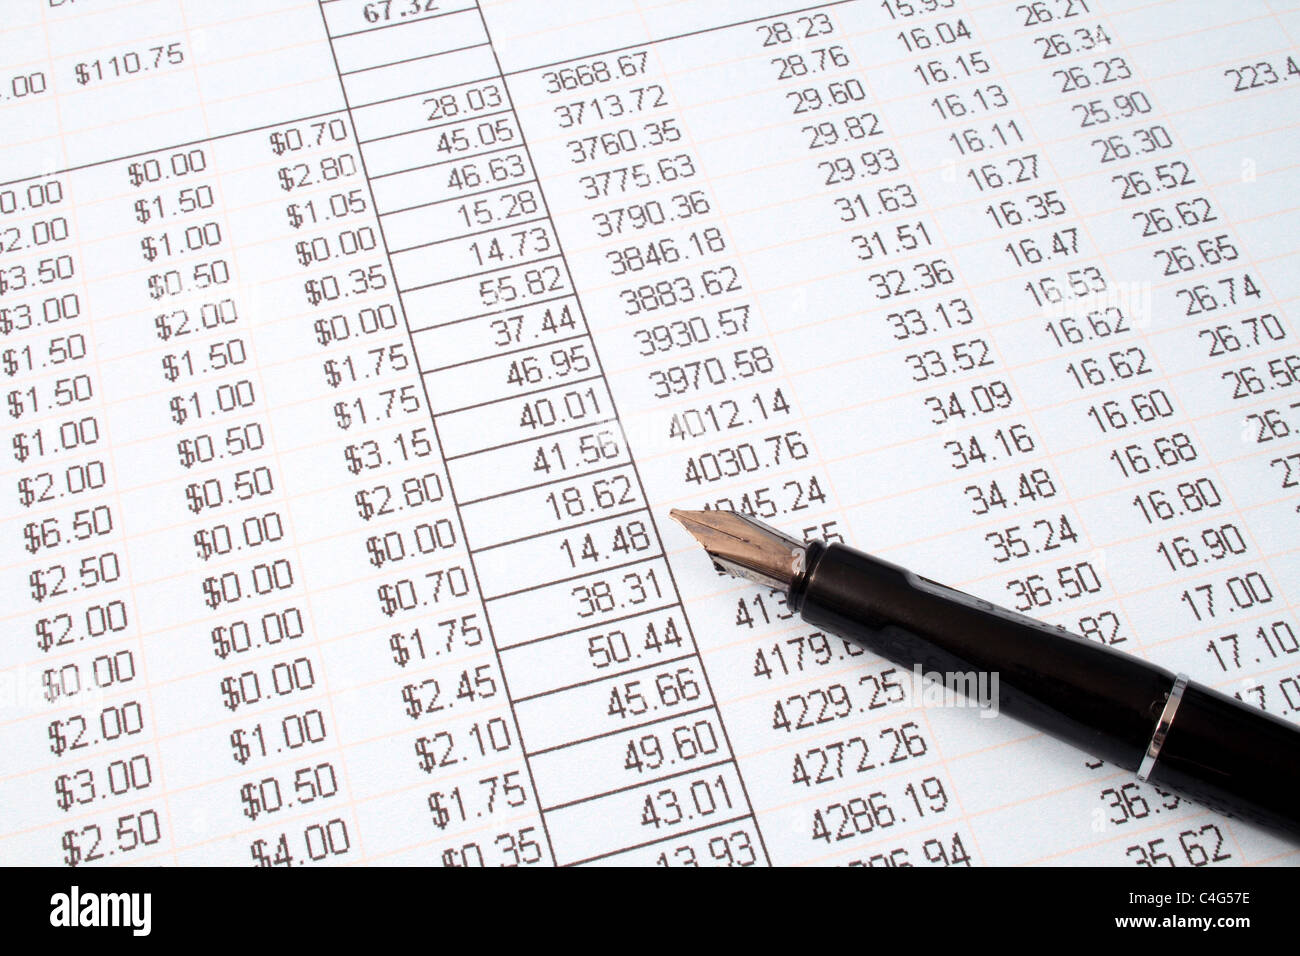 Reviewing the accounts in dollars on a printed spreadsheet. Stock Photo